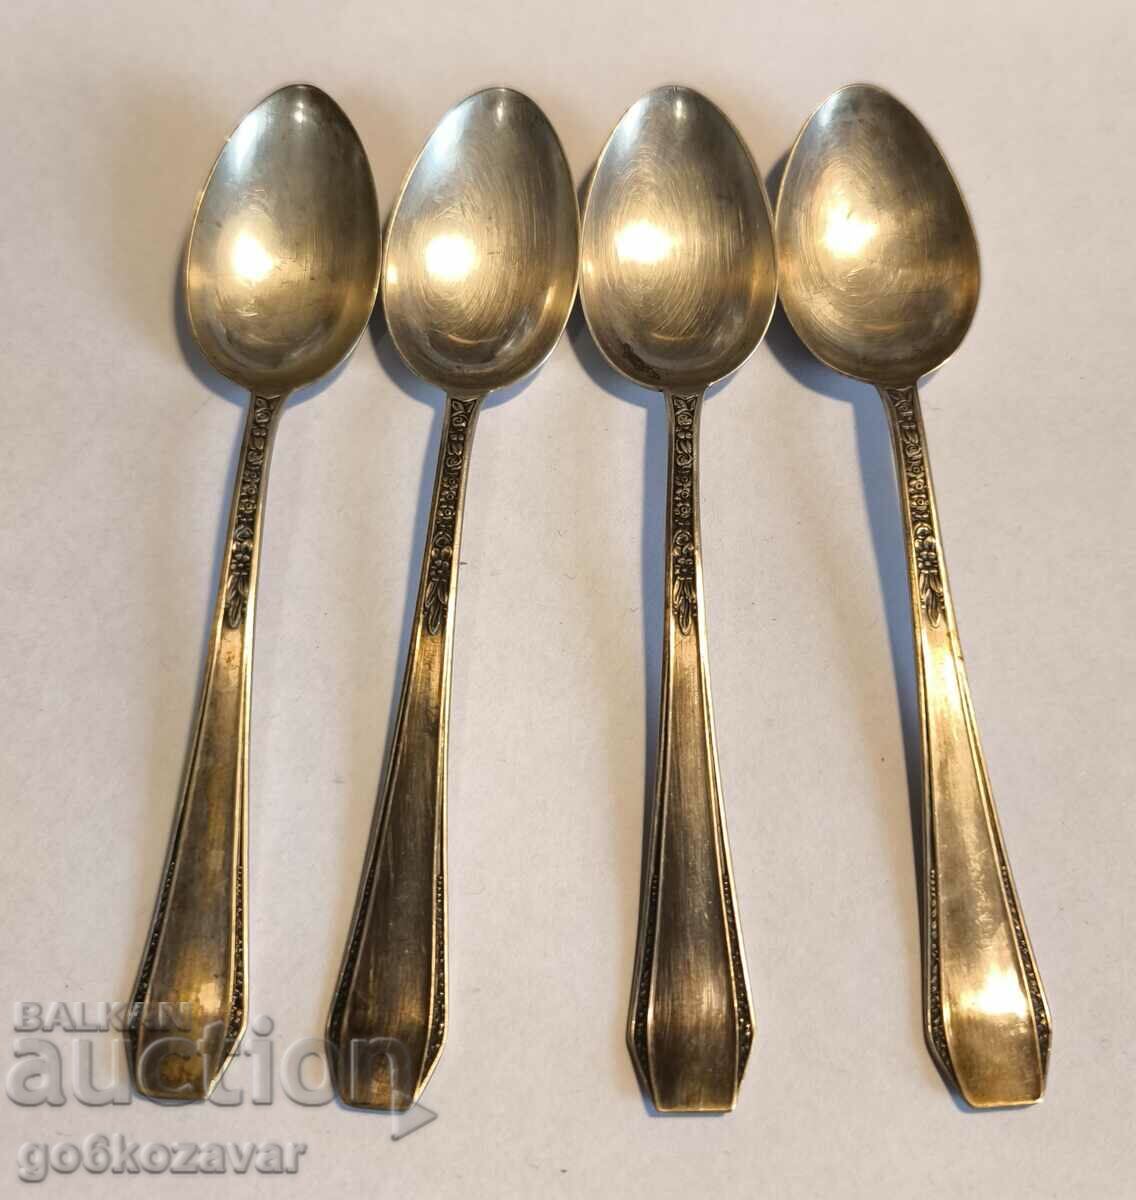 Set of old silver spoons. Perfect collection!